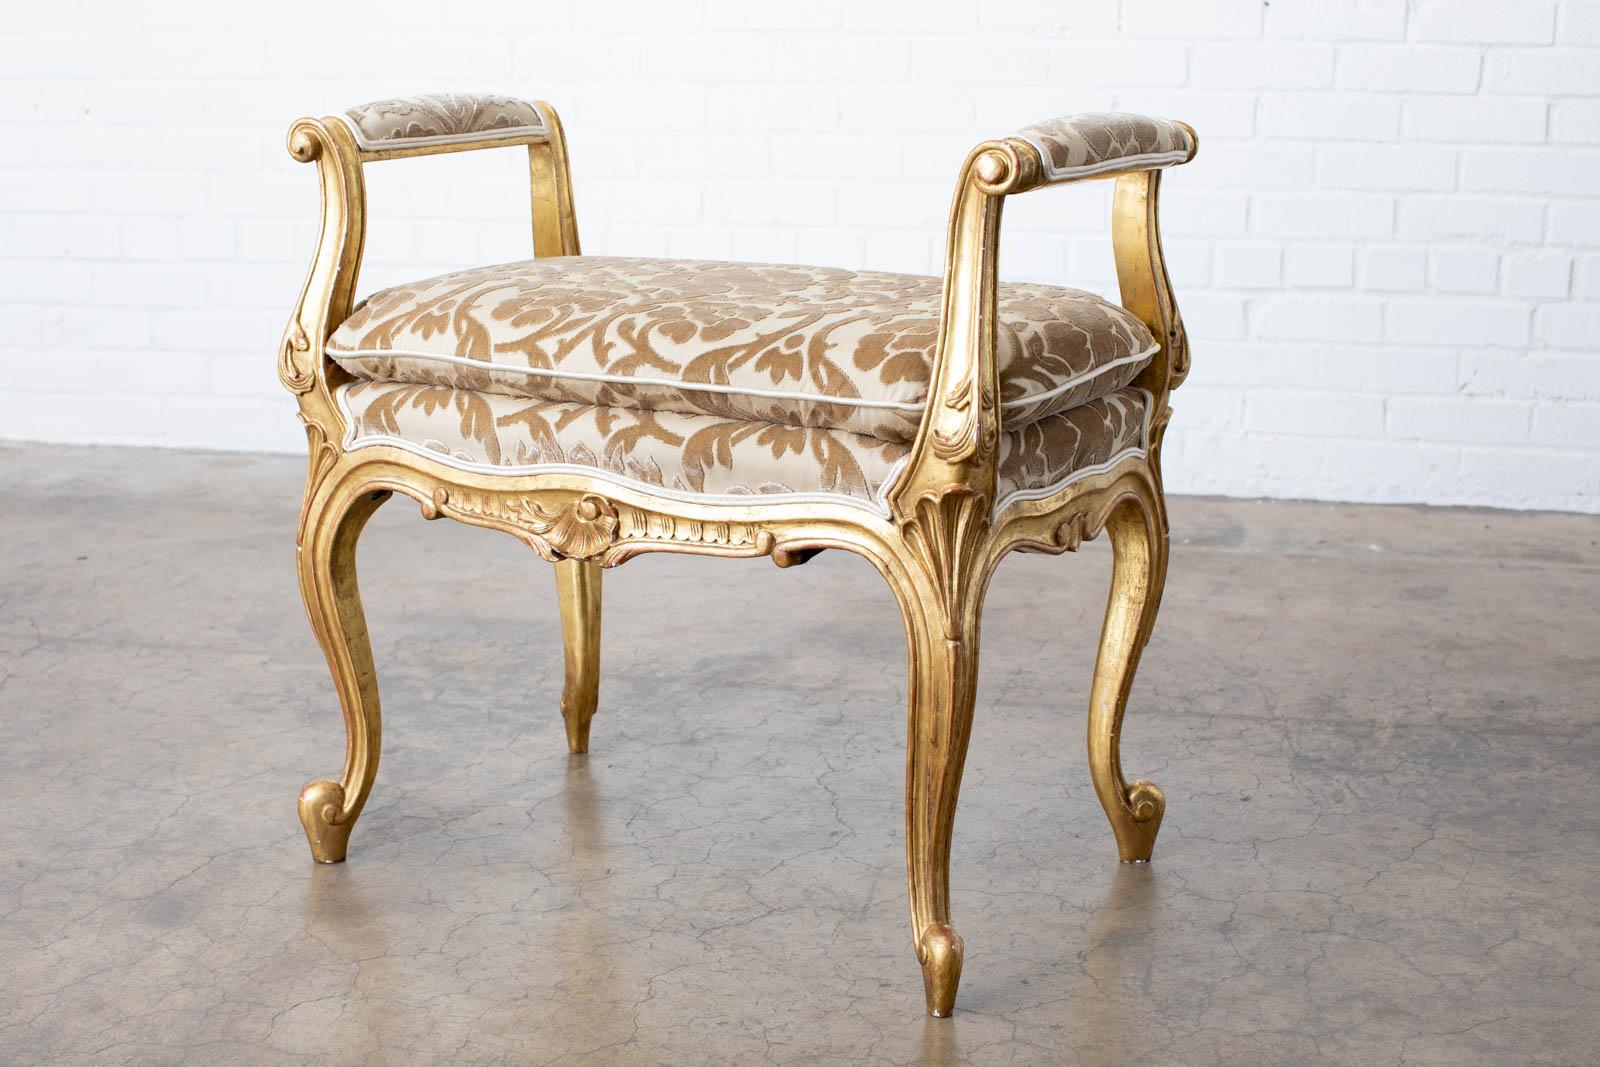 Gorgeous pair of French carved giltwood vanity benches or window benches. Made in the grand Louis XV style featuring a Fortuny style print of floral vines in velvet. The benches have a beautiful aged patina with desirable wear and fading on the